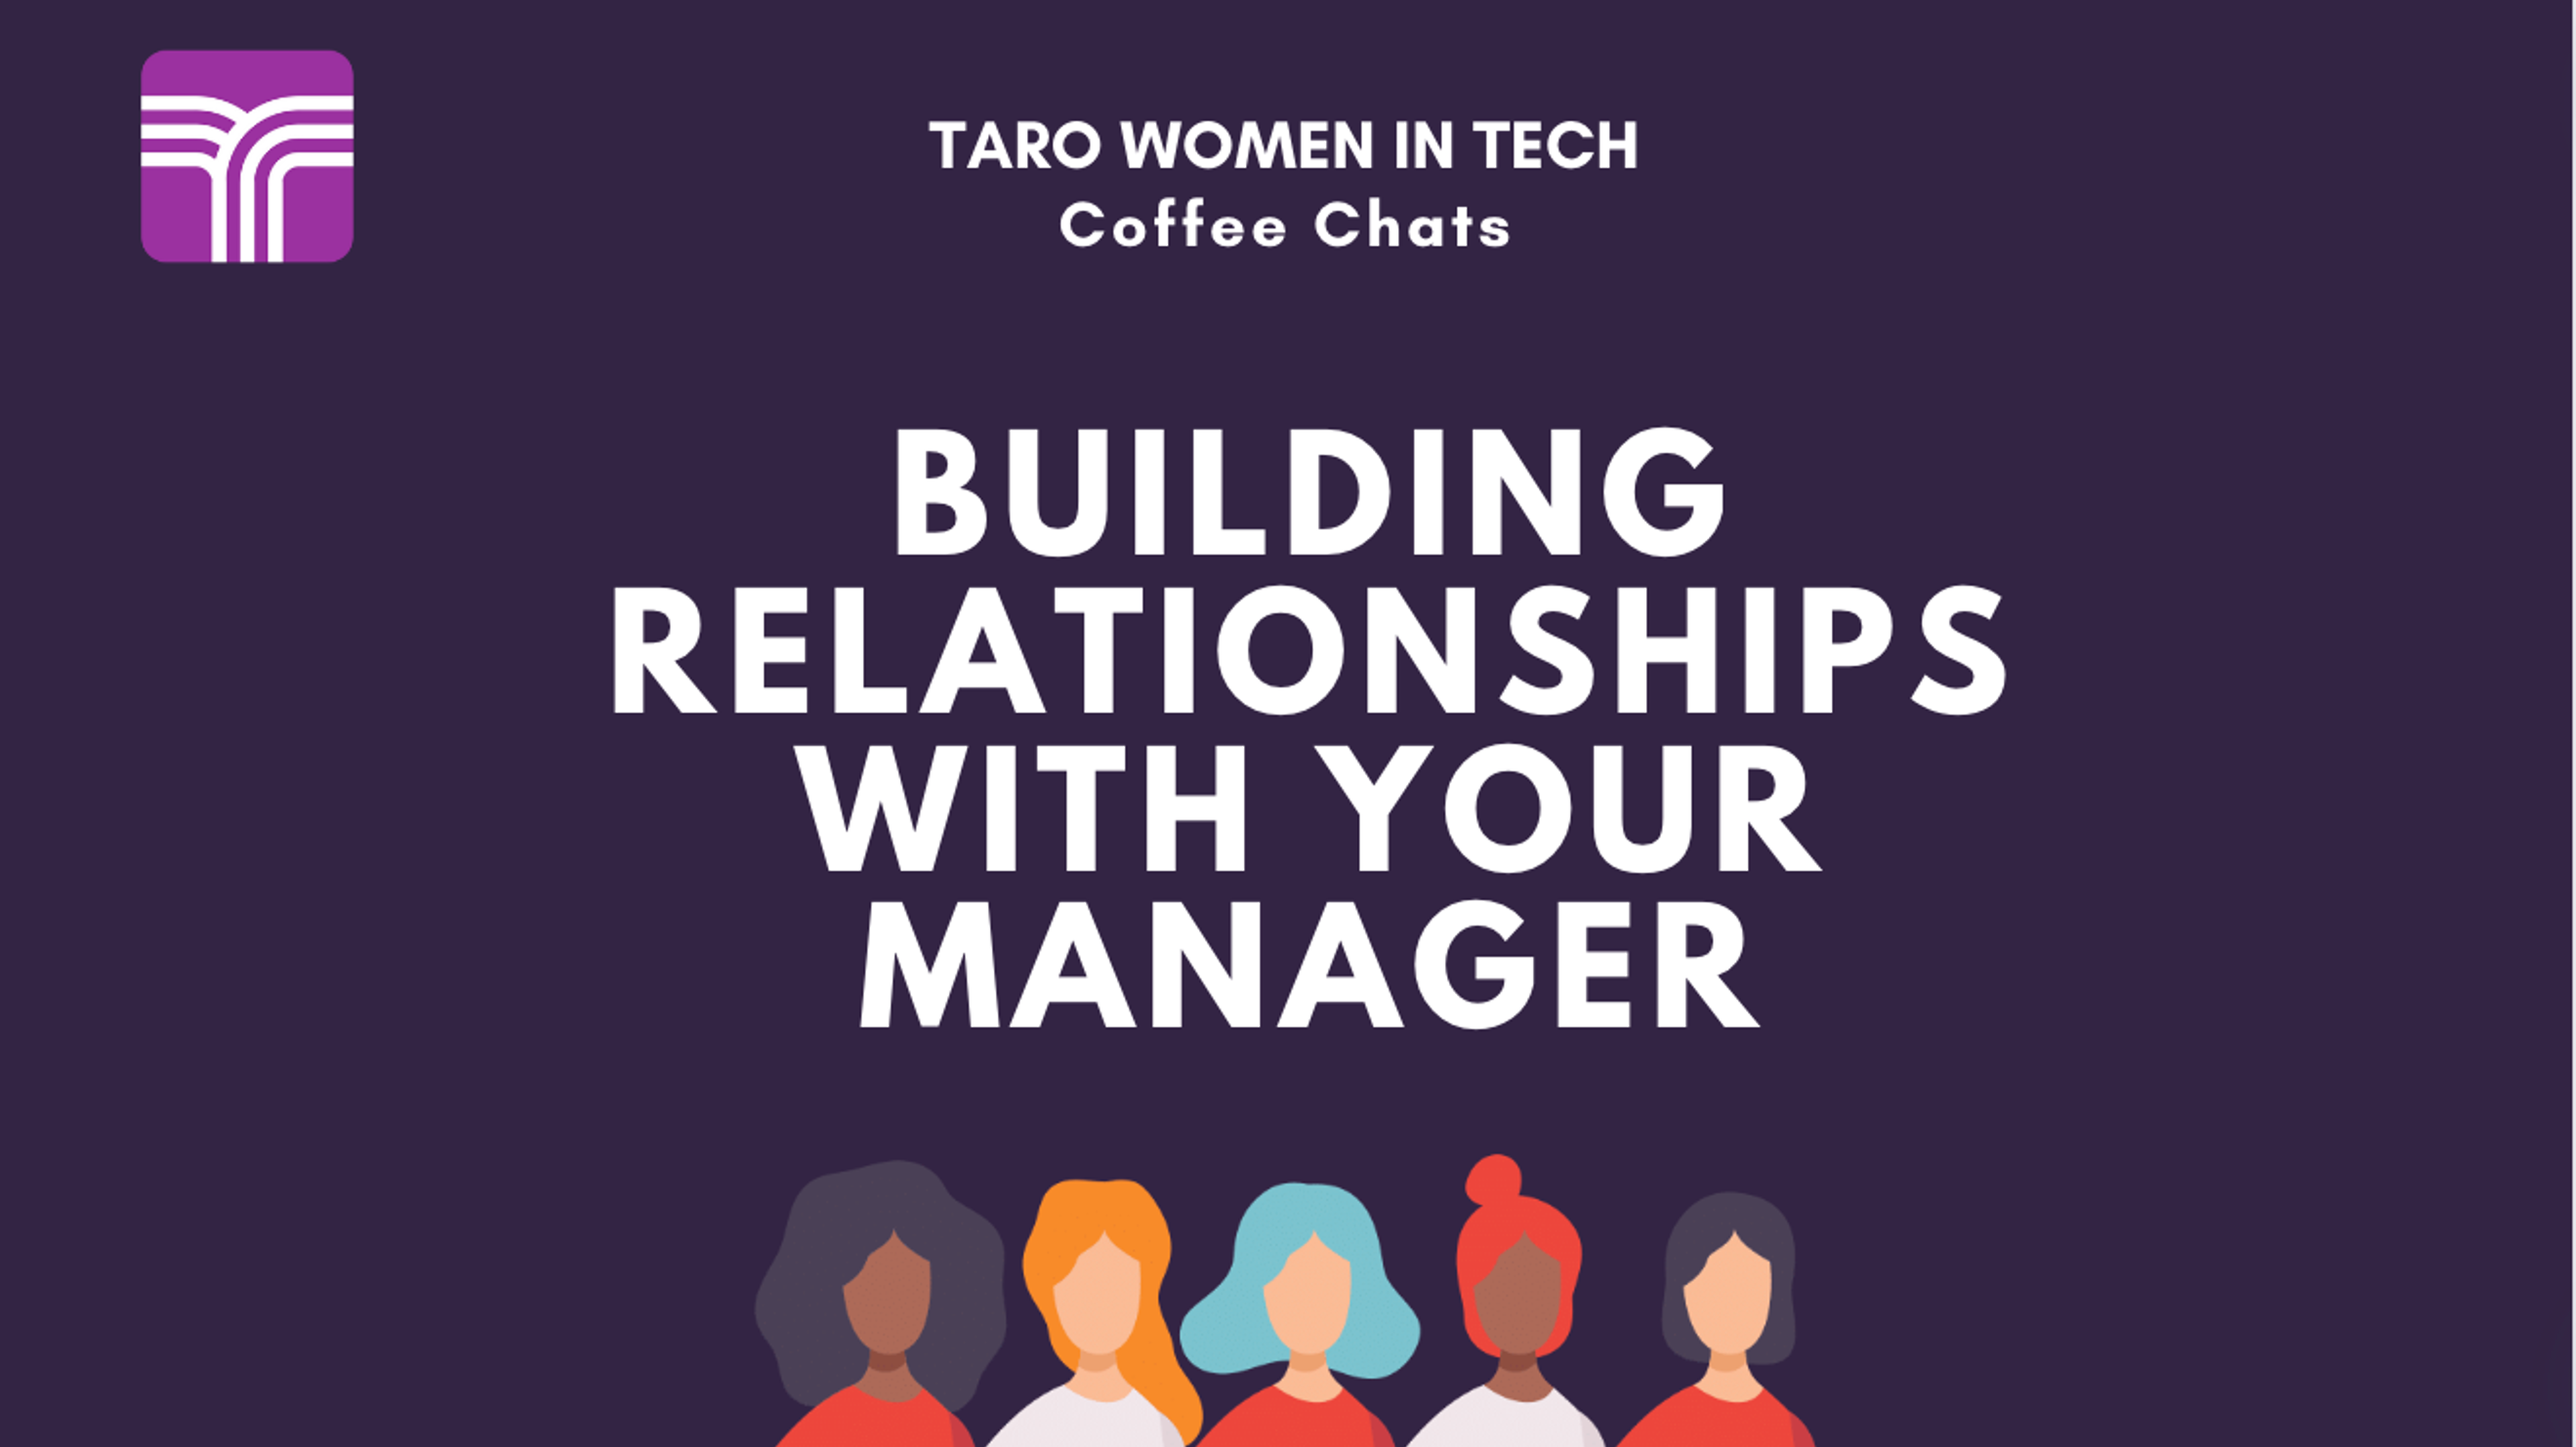 Women In Tech Coffee Chat: Building Relationships with your Manager event